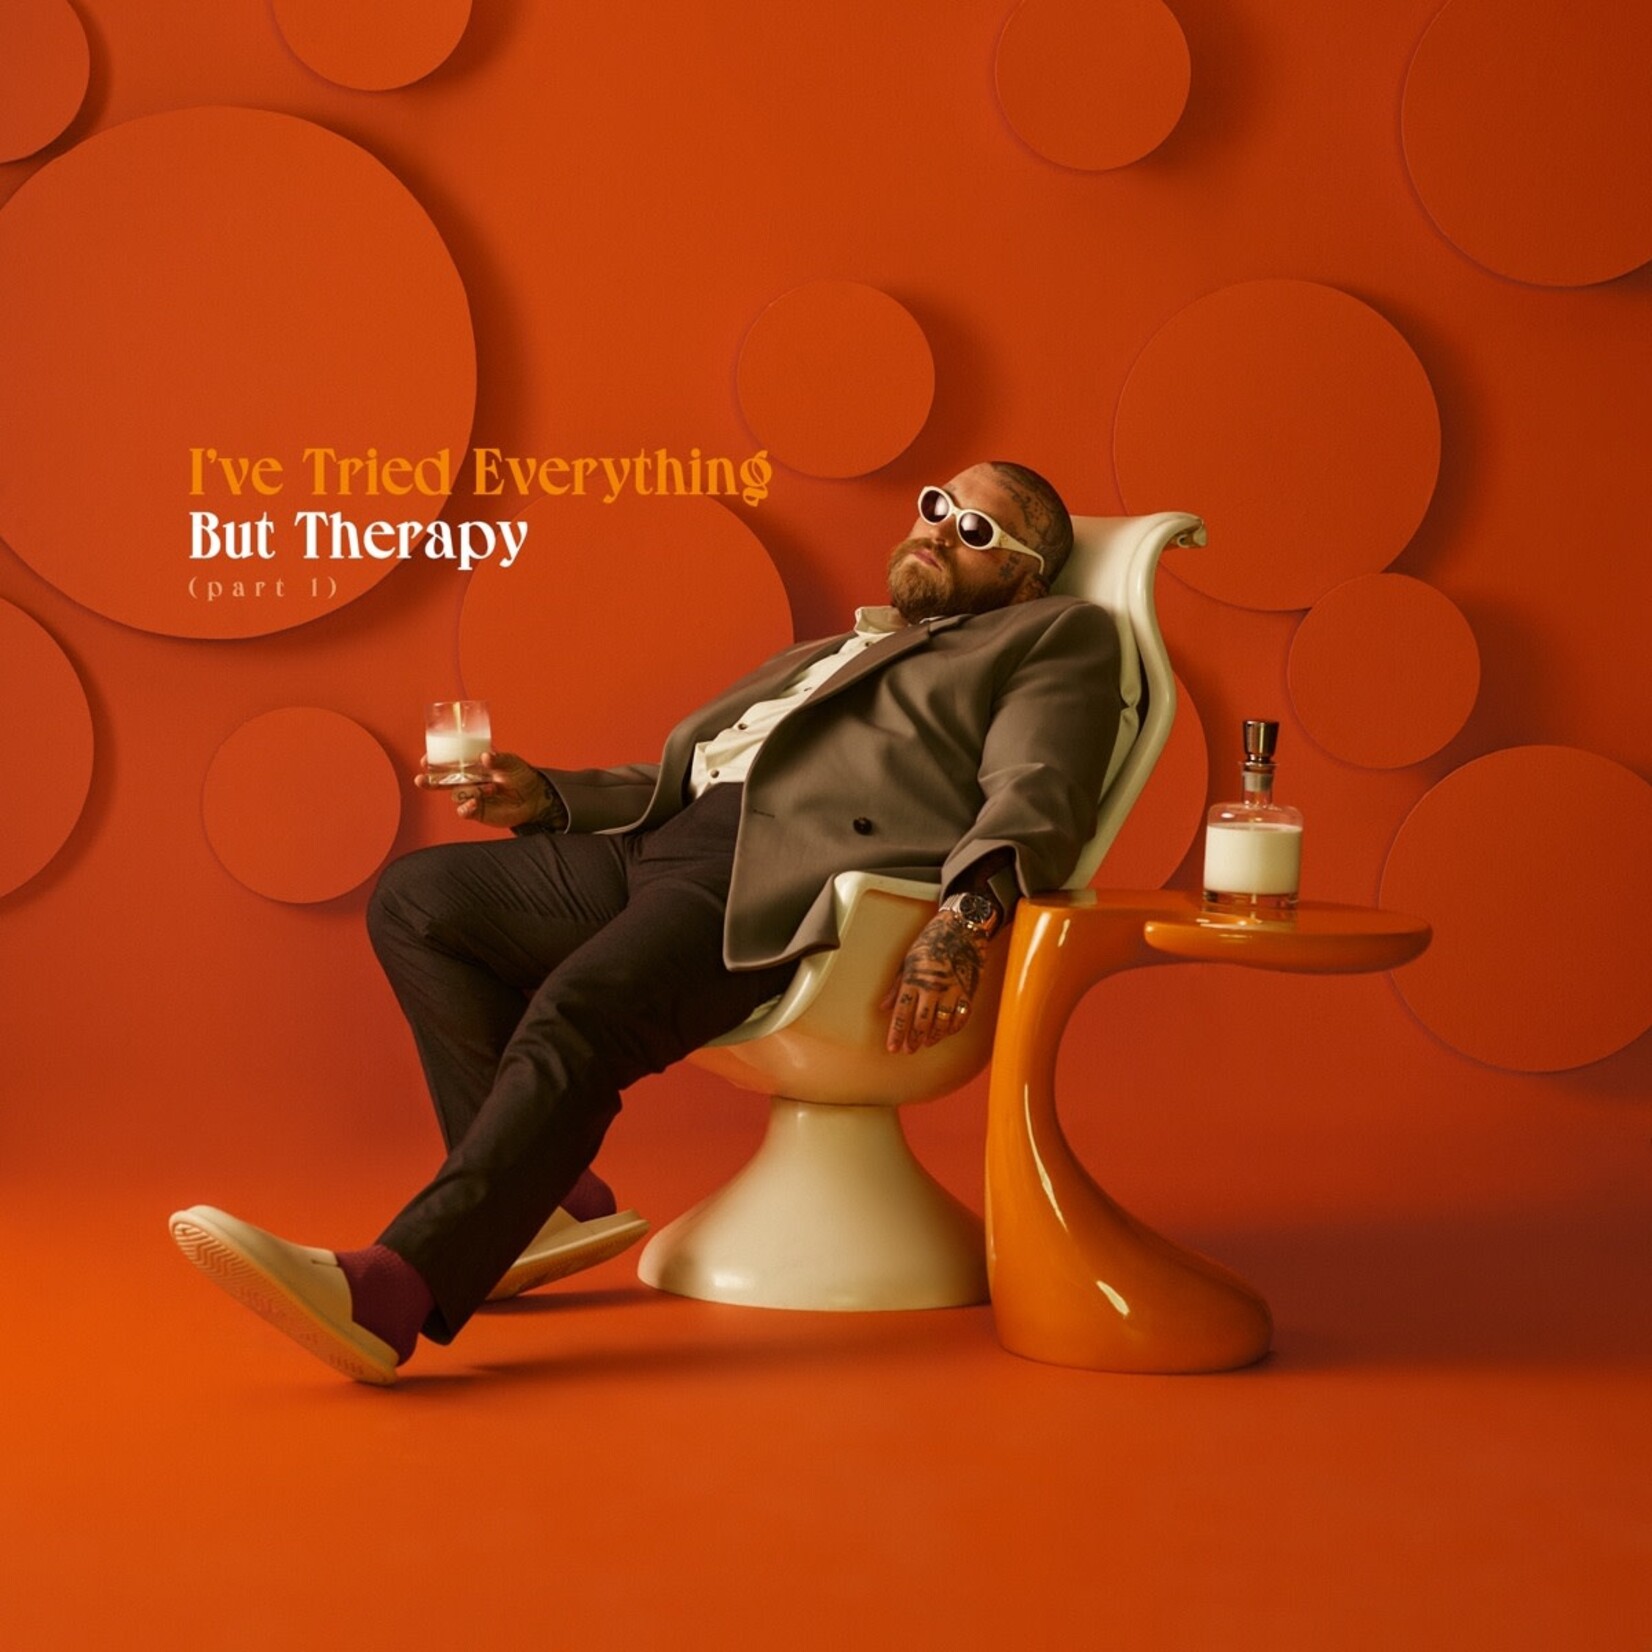 [New] Teddy Swims - I've Tried Everything But Therapy (Part 1)